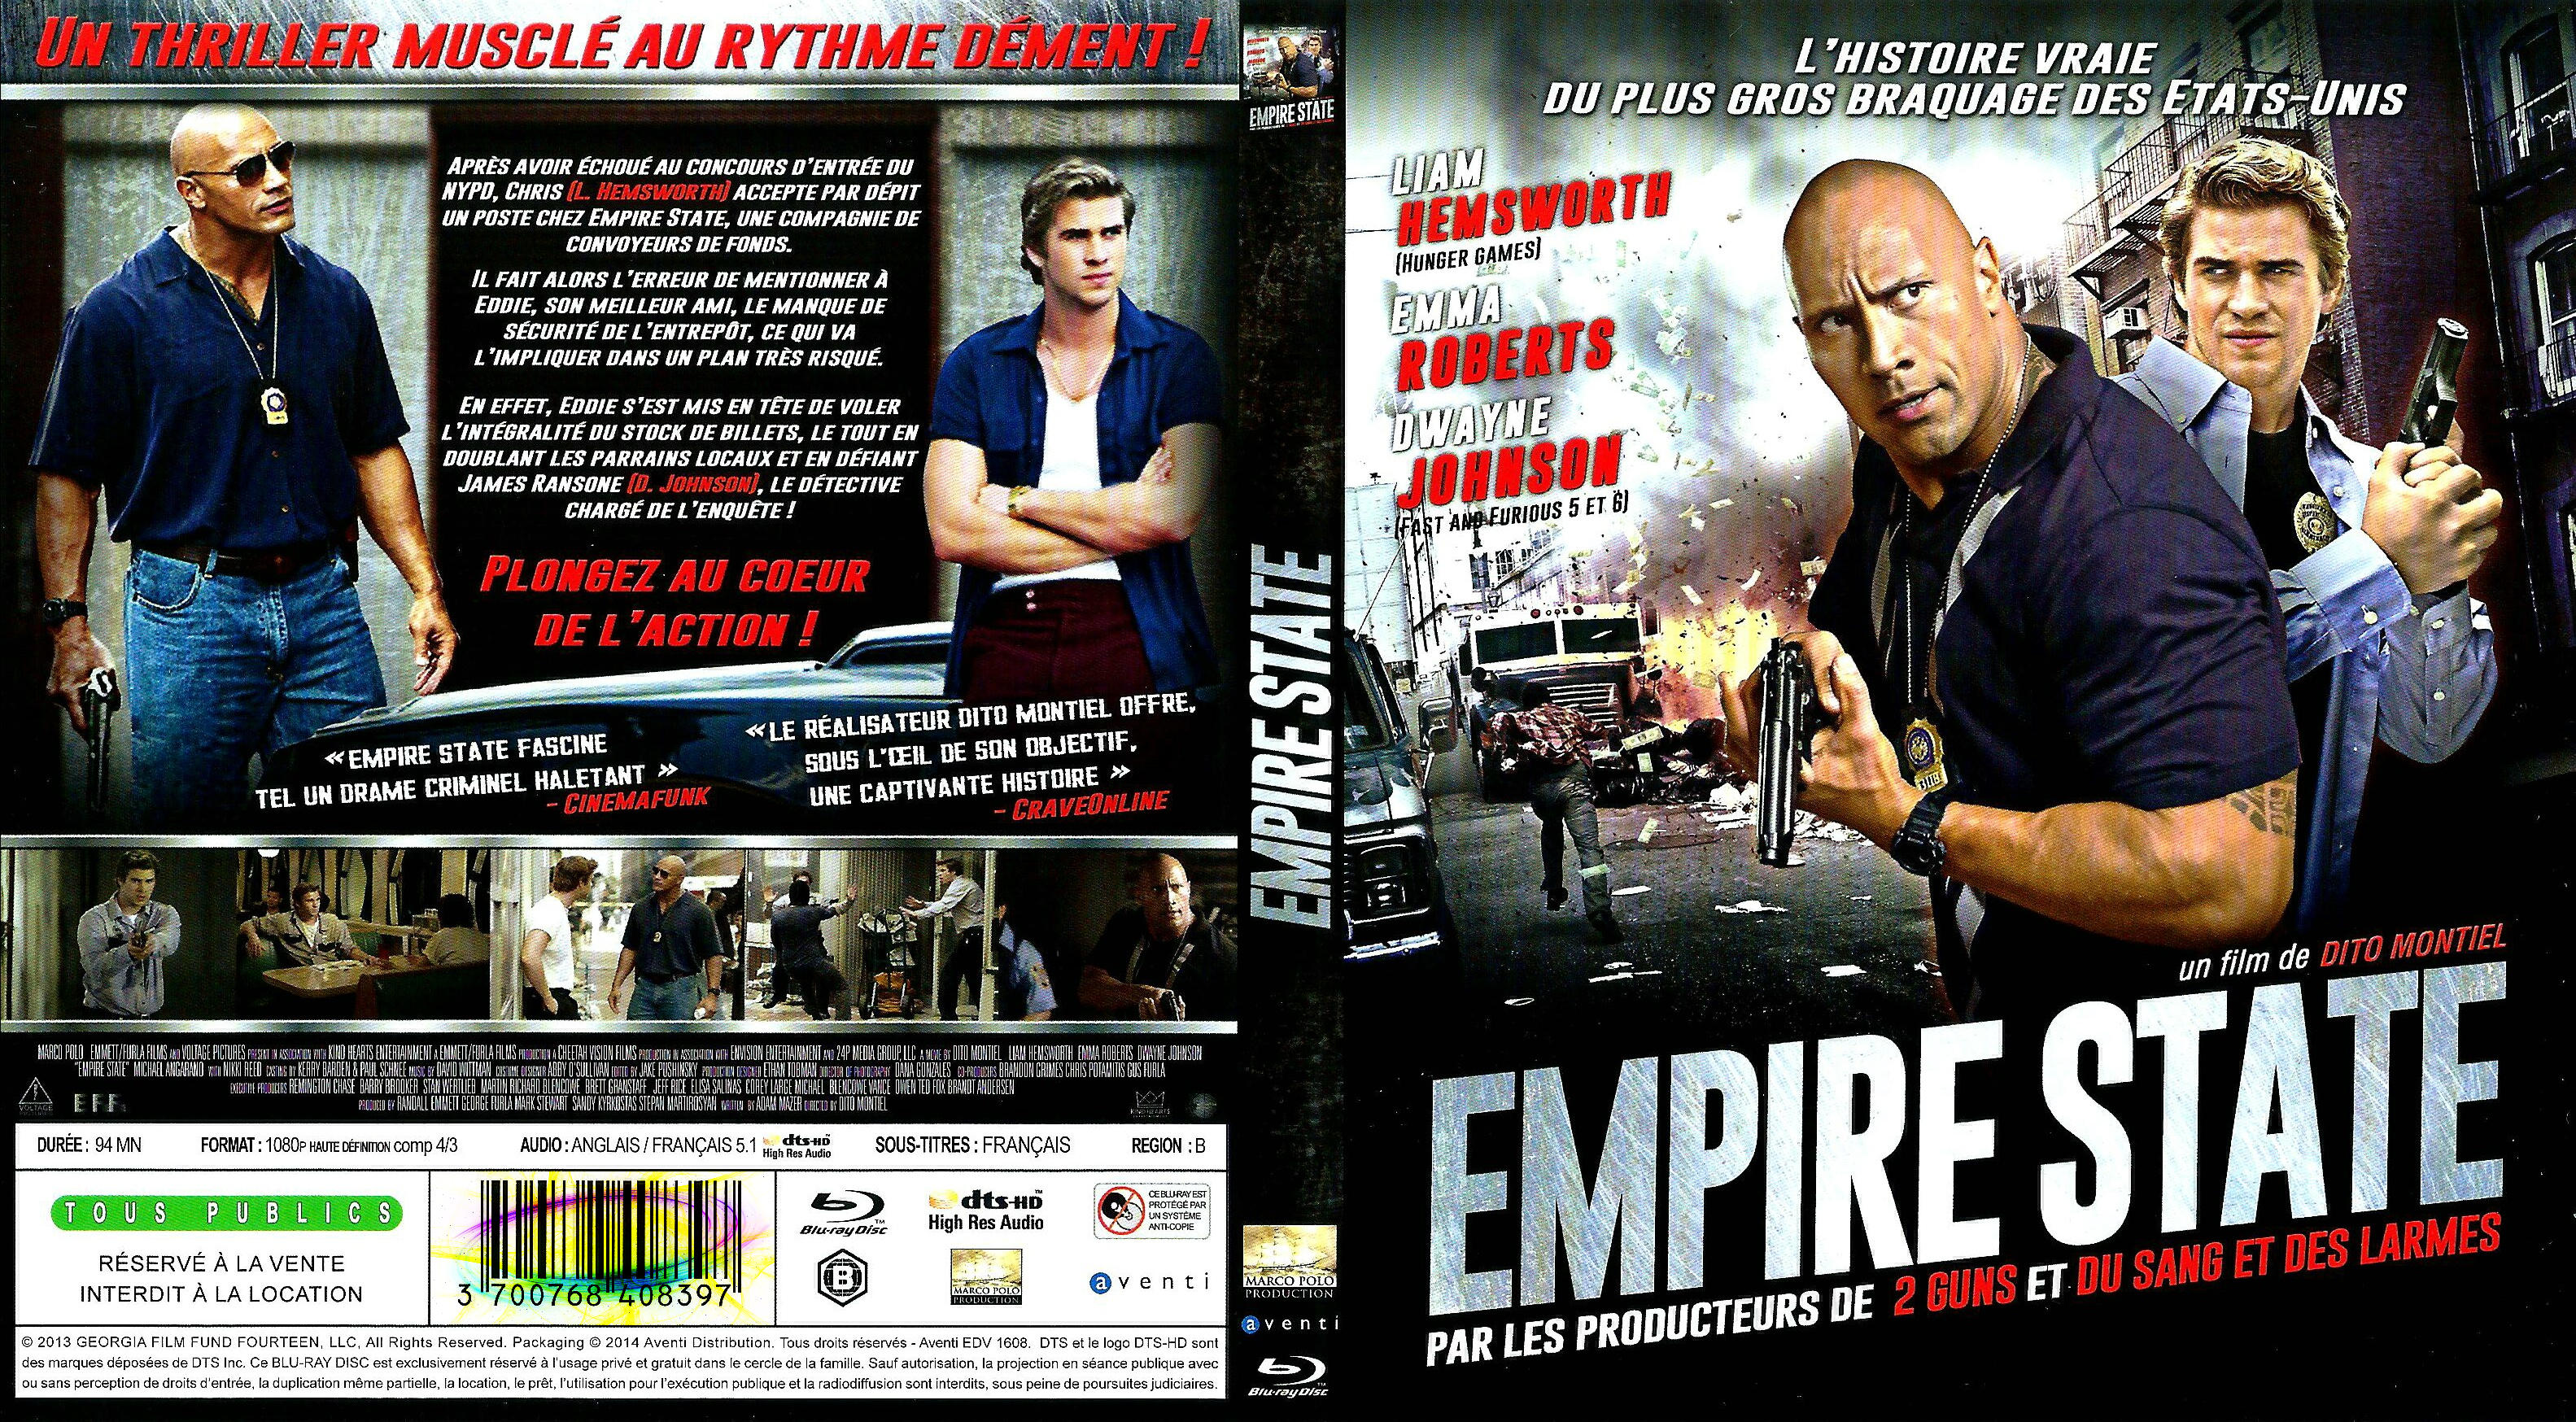 Jaquette DVD Empire state (BLU-RAY)